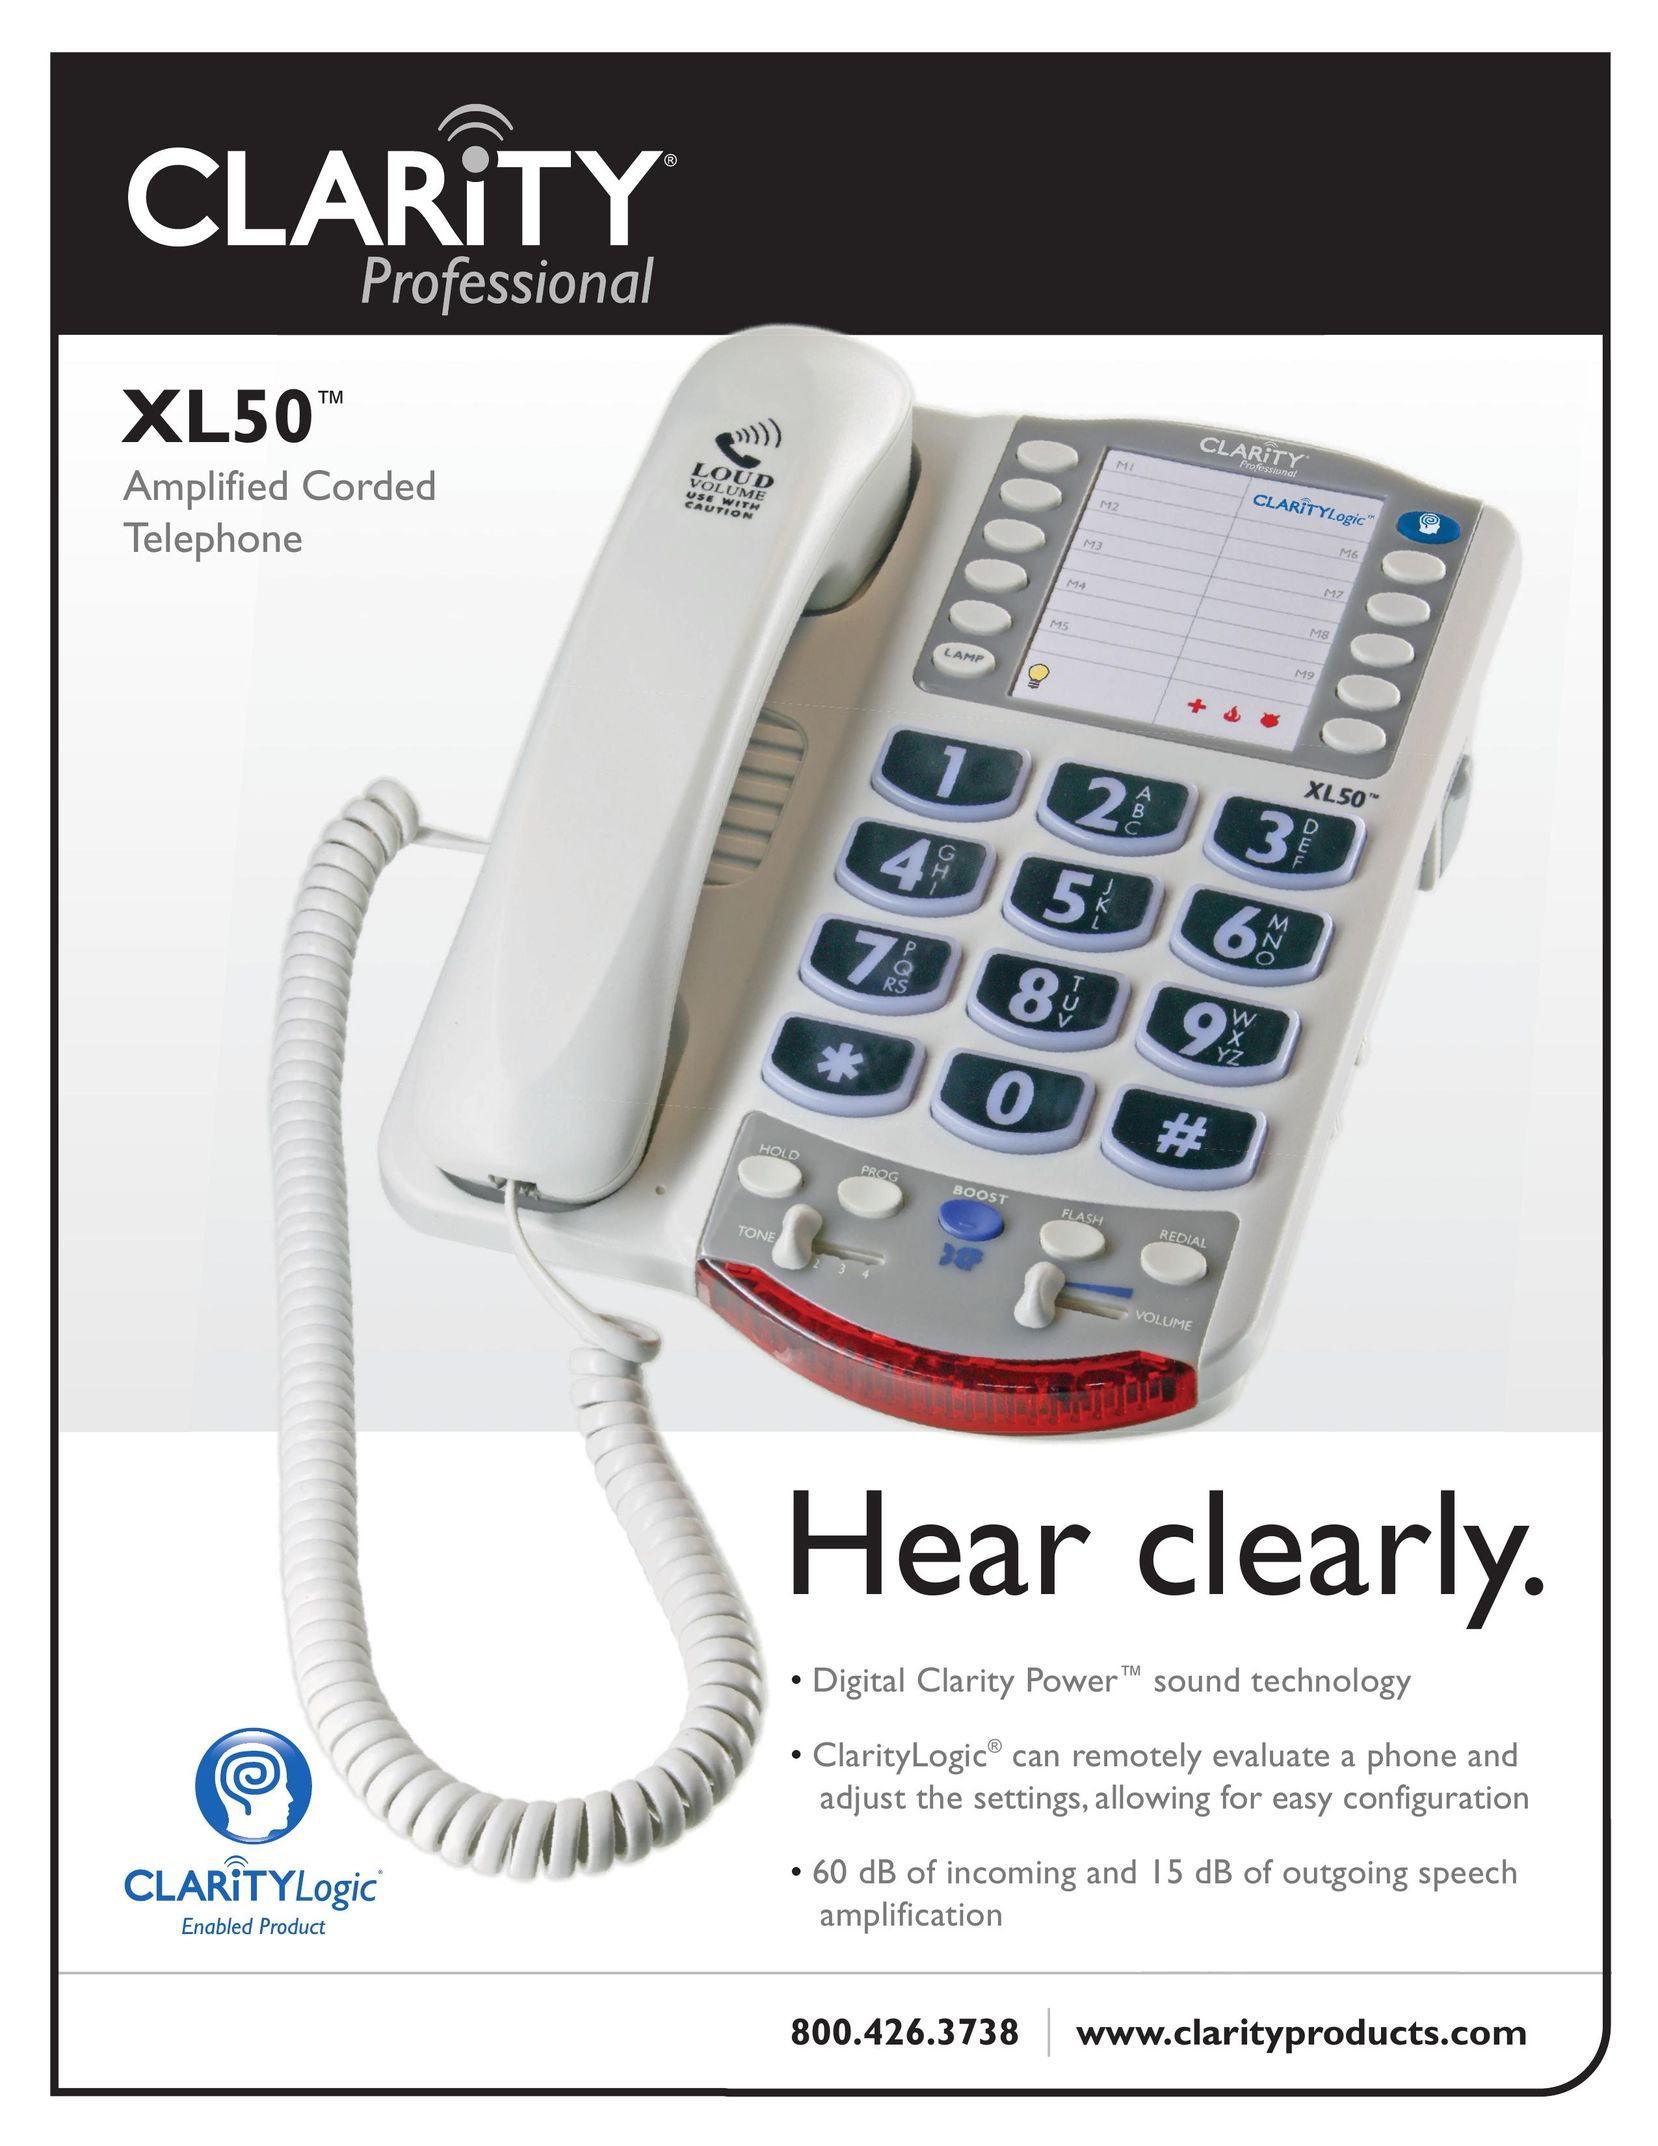 Clarity XL50TM Amplified Phone User Manual